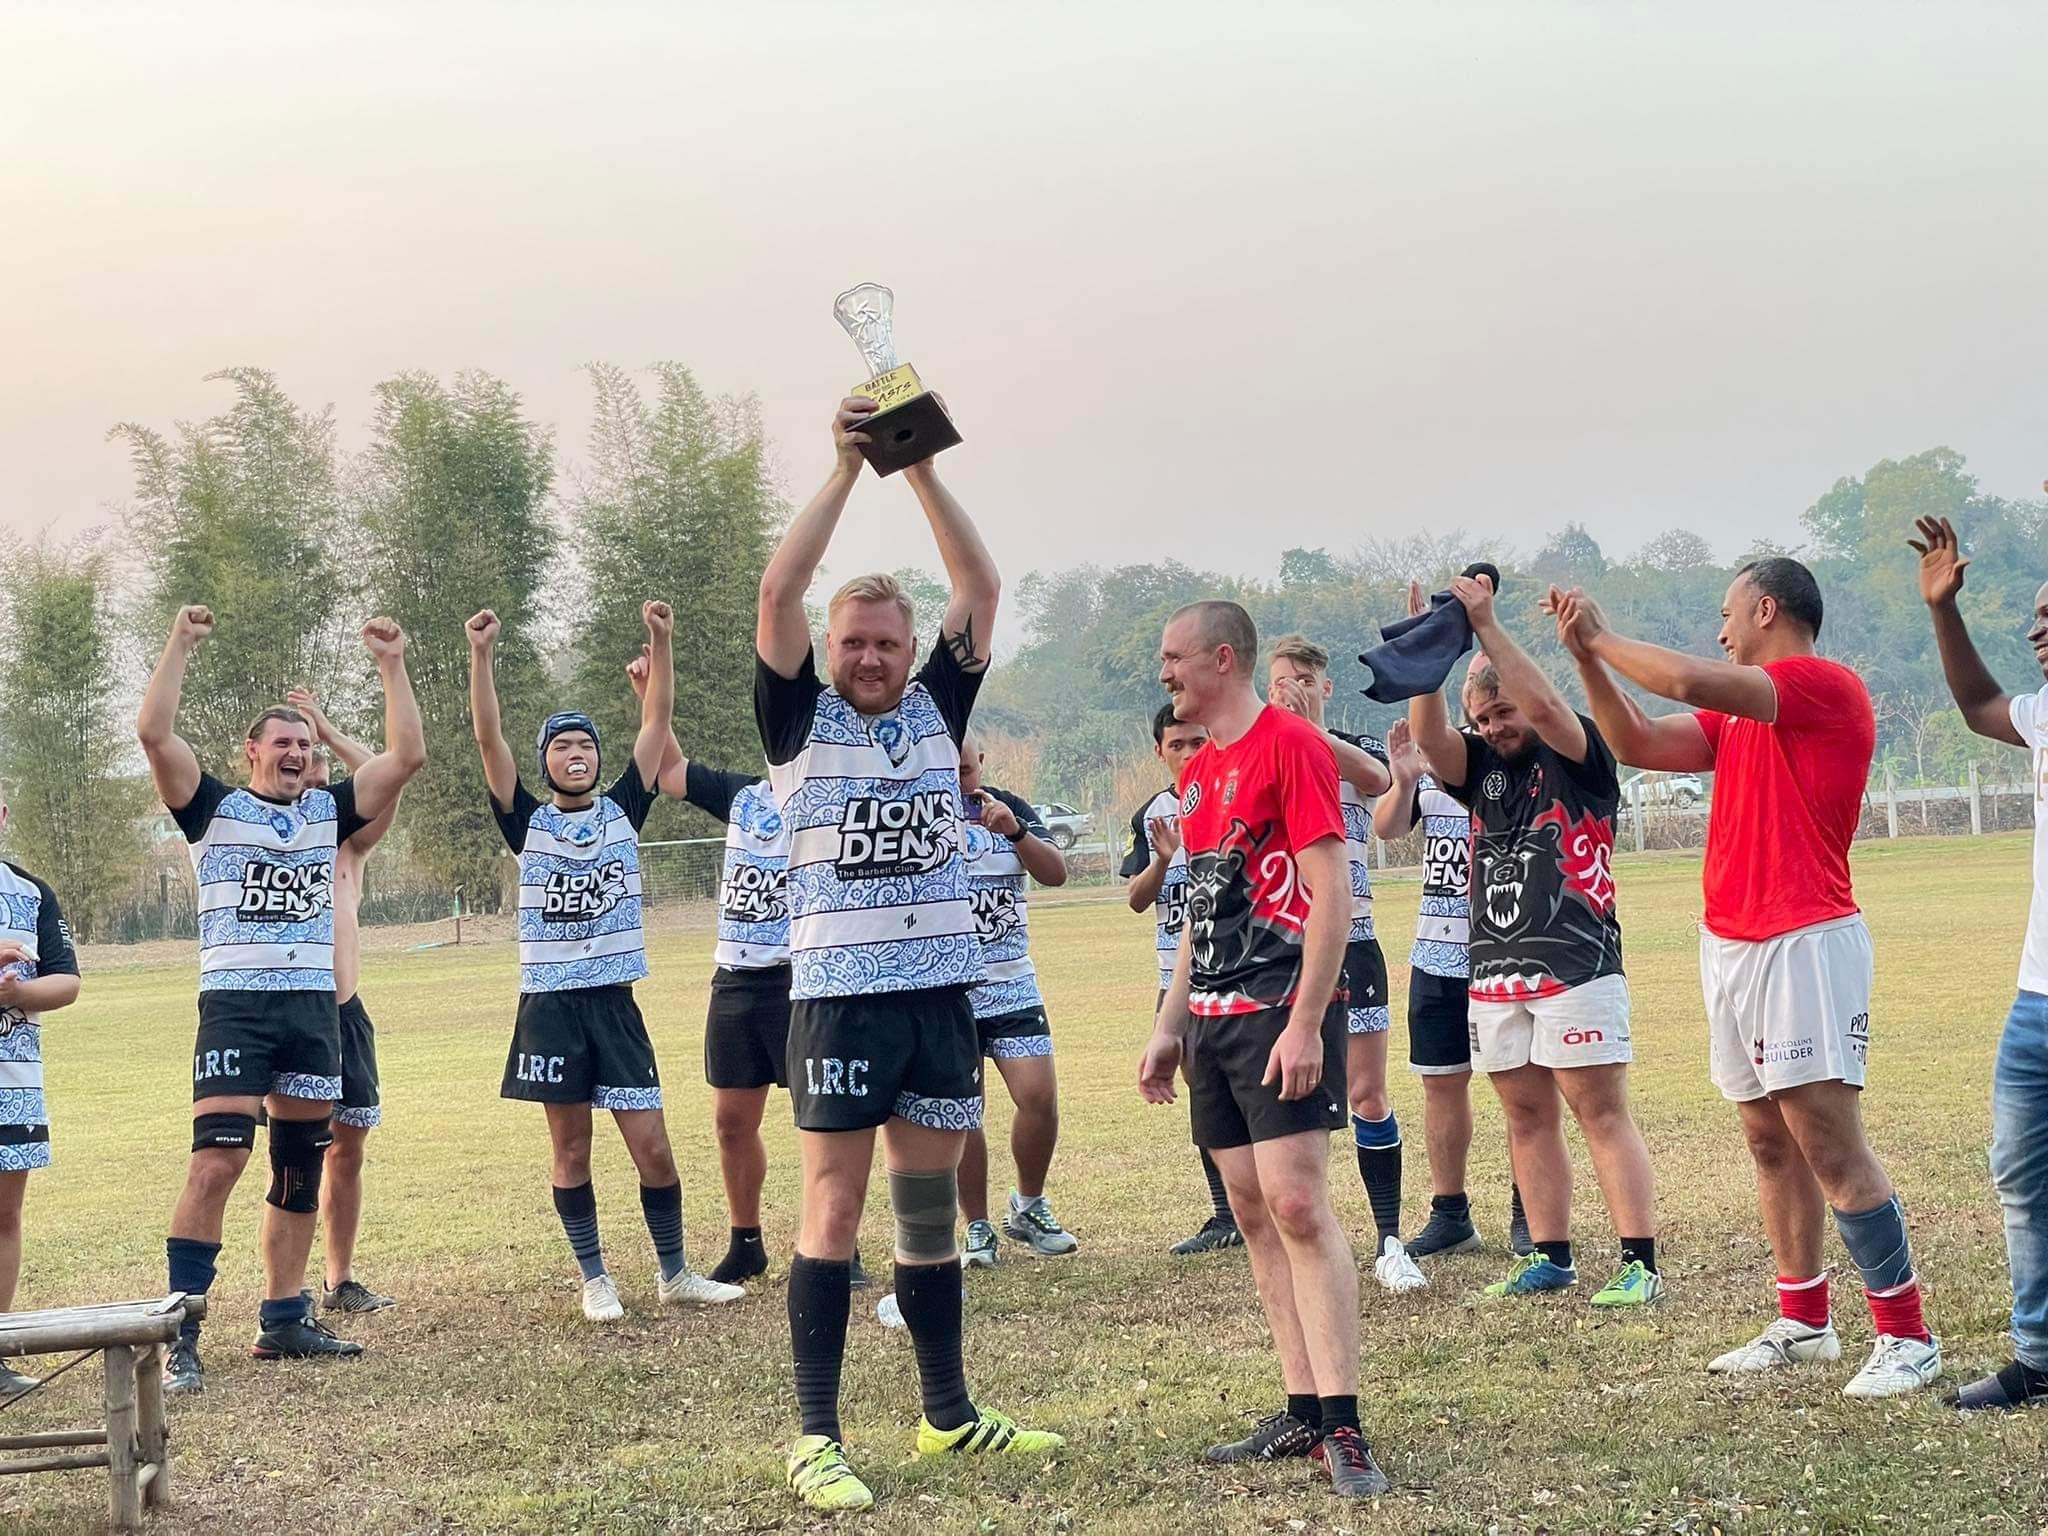 Battle of the Beasts 2023 | Lanna Rugby Club Chiang Mai